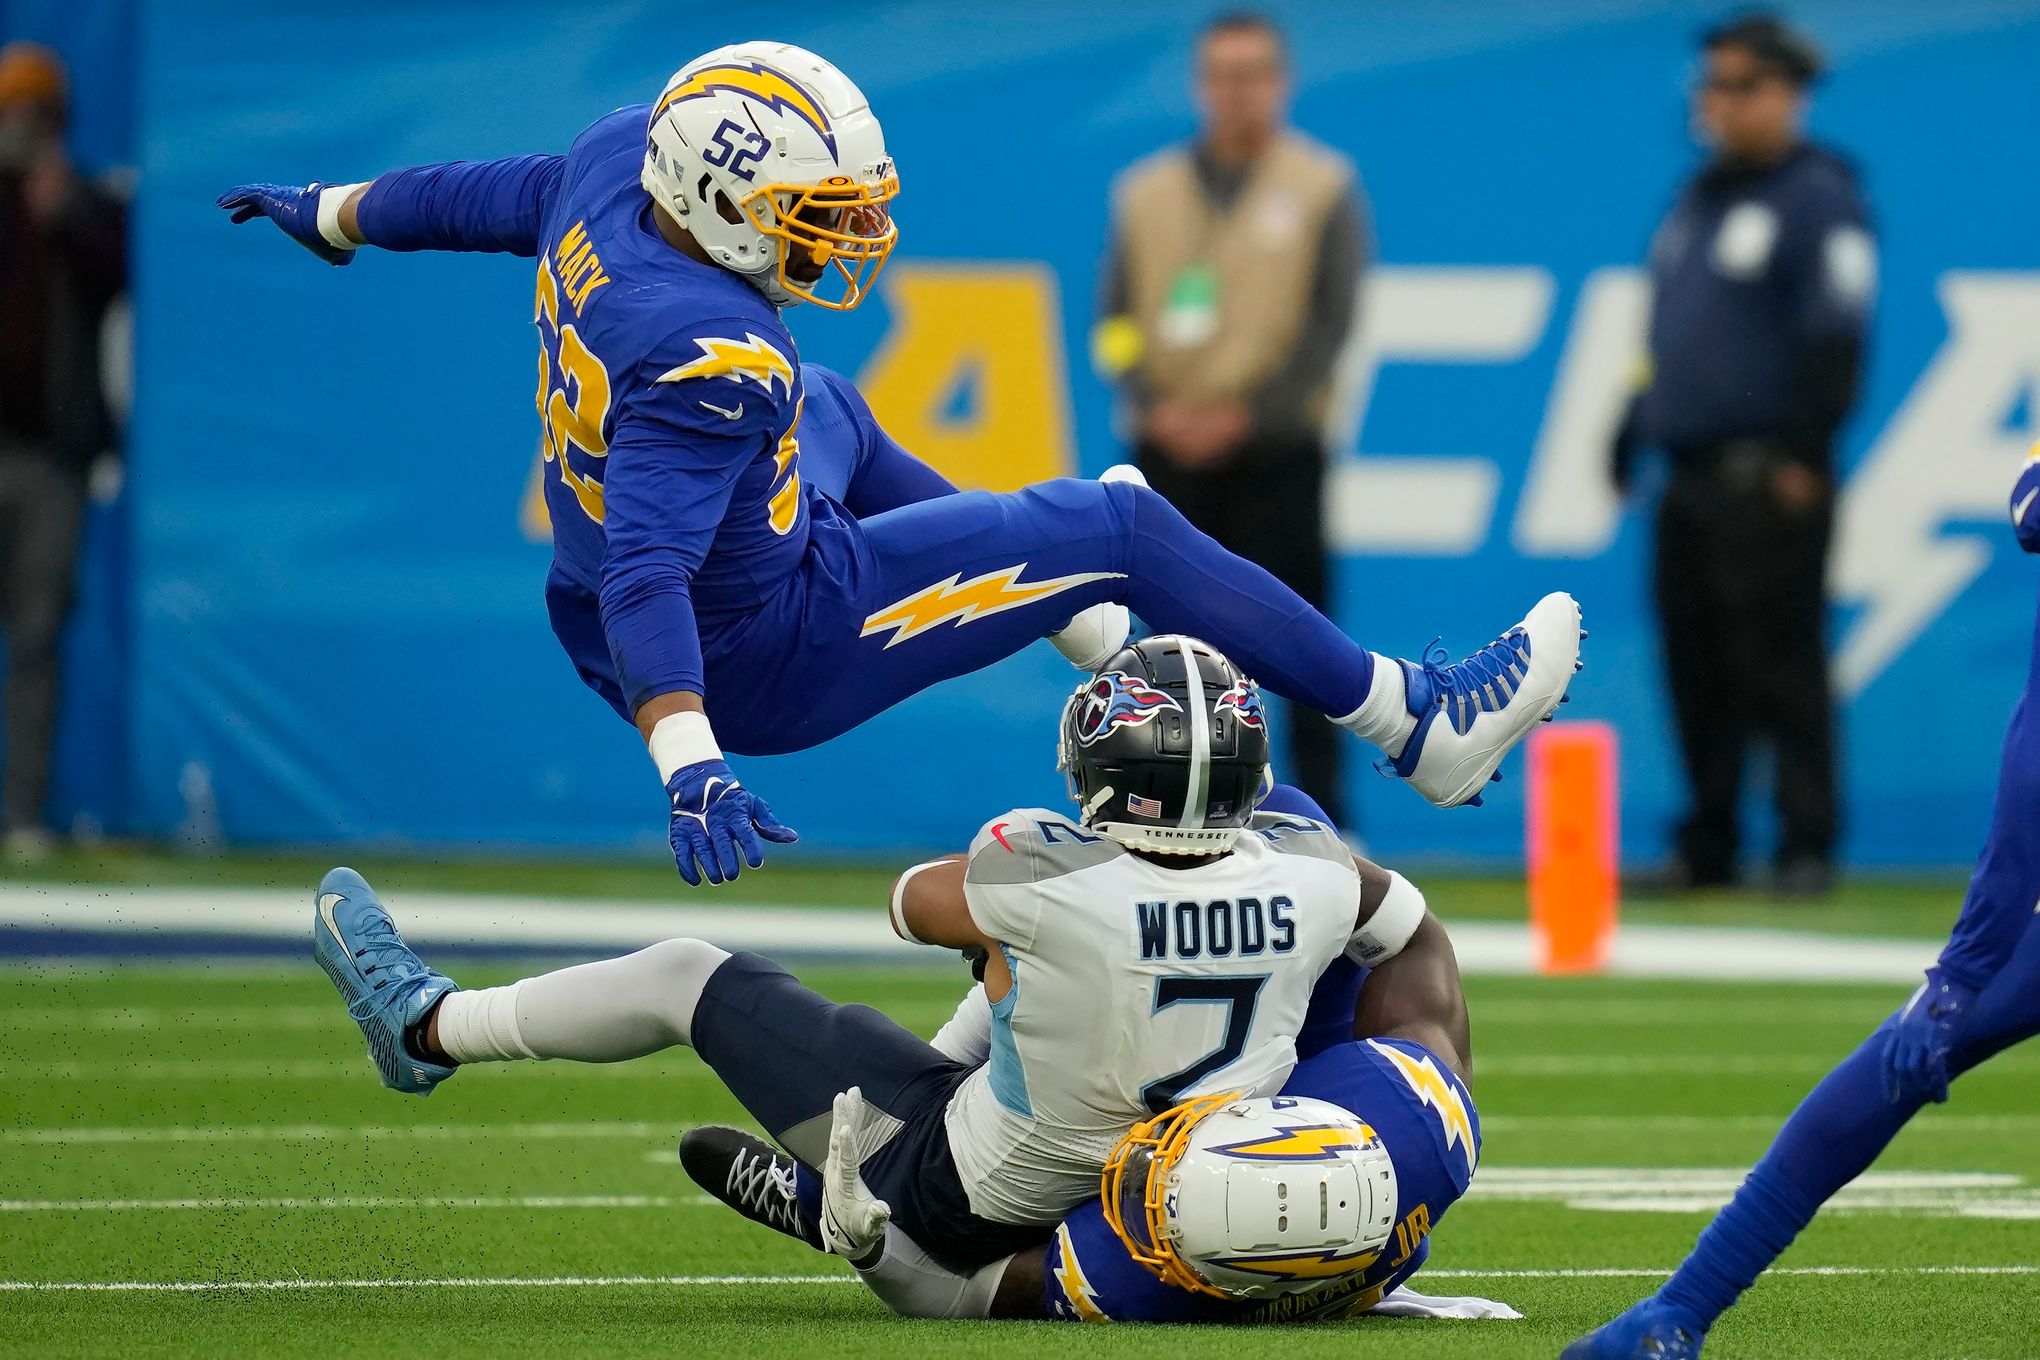 Chargers close in on playoff spot against injuries, history